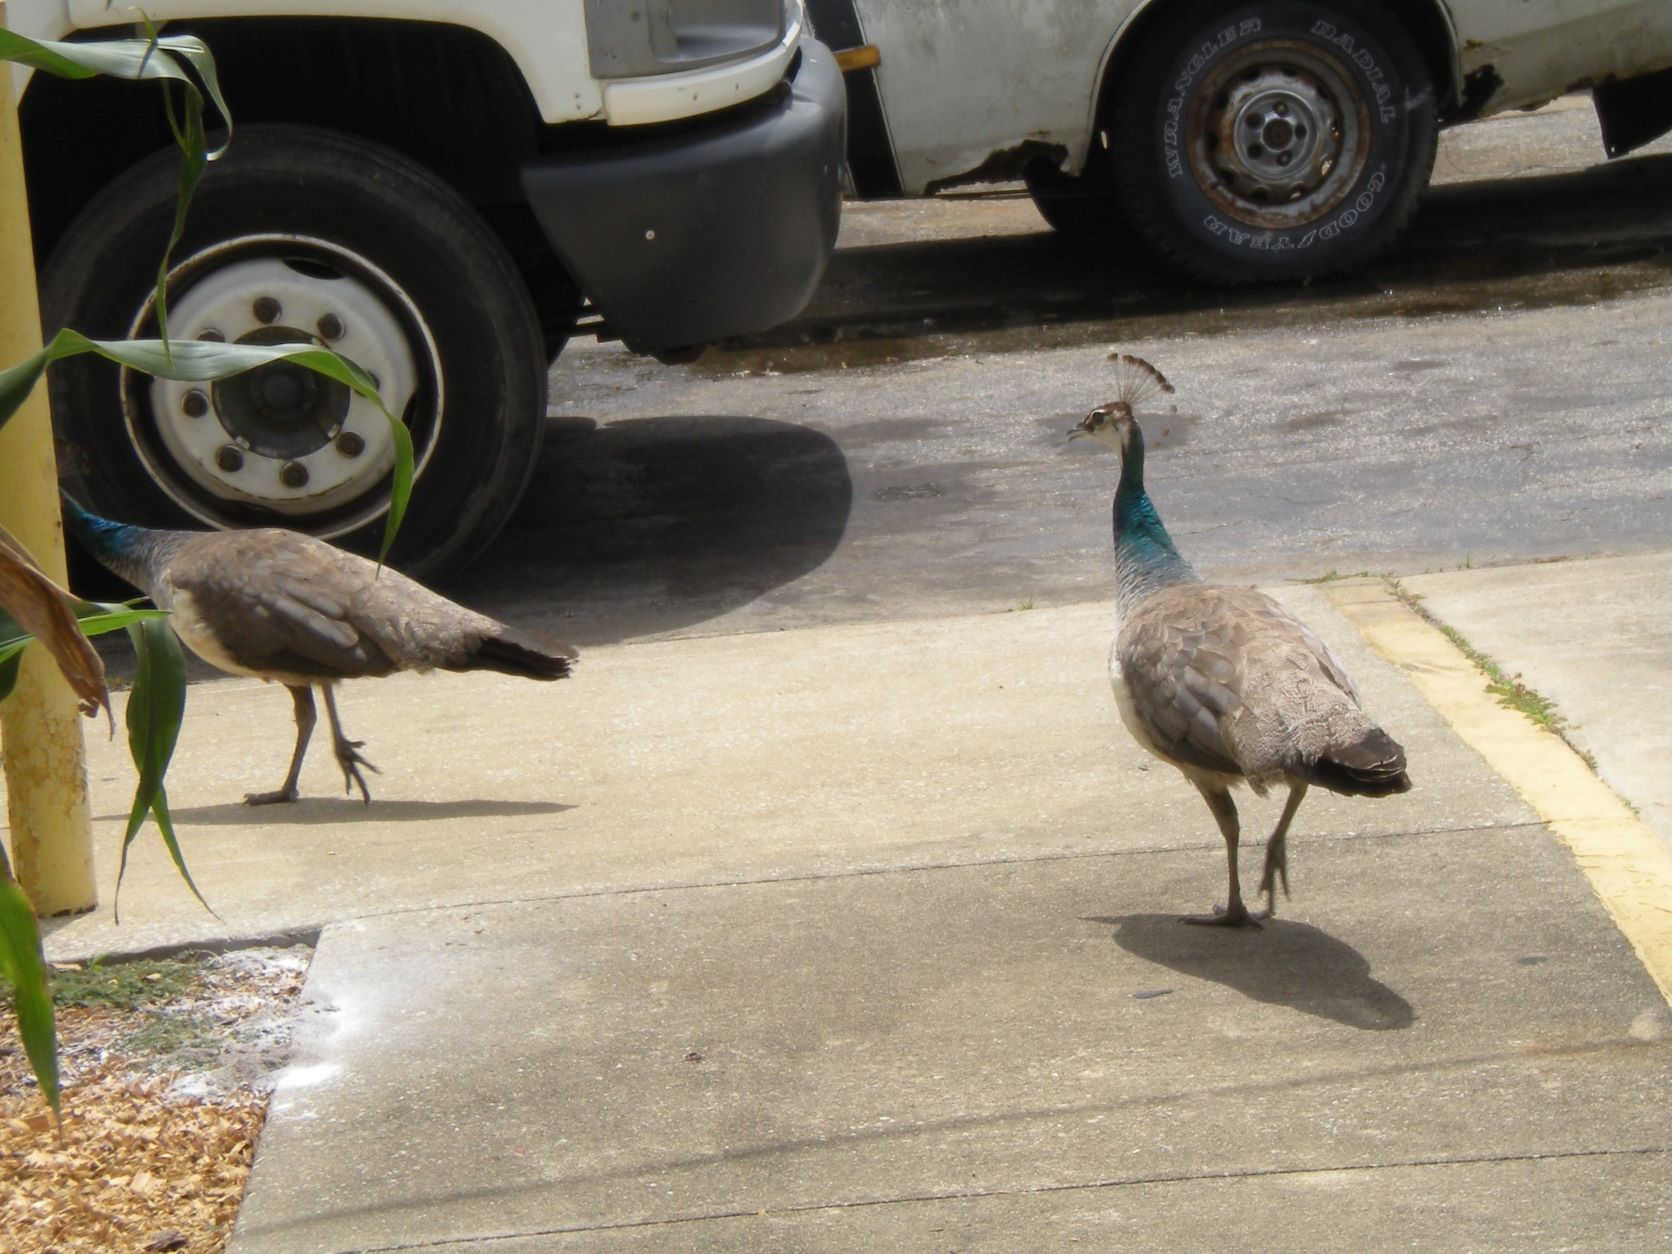 a pair of peahens, perhaps a bit camera-shy as they walk away when the camera comes out